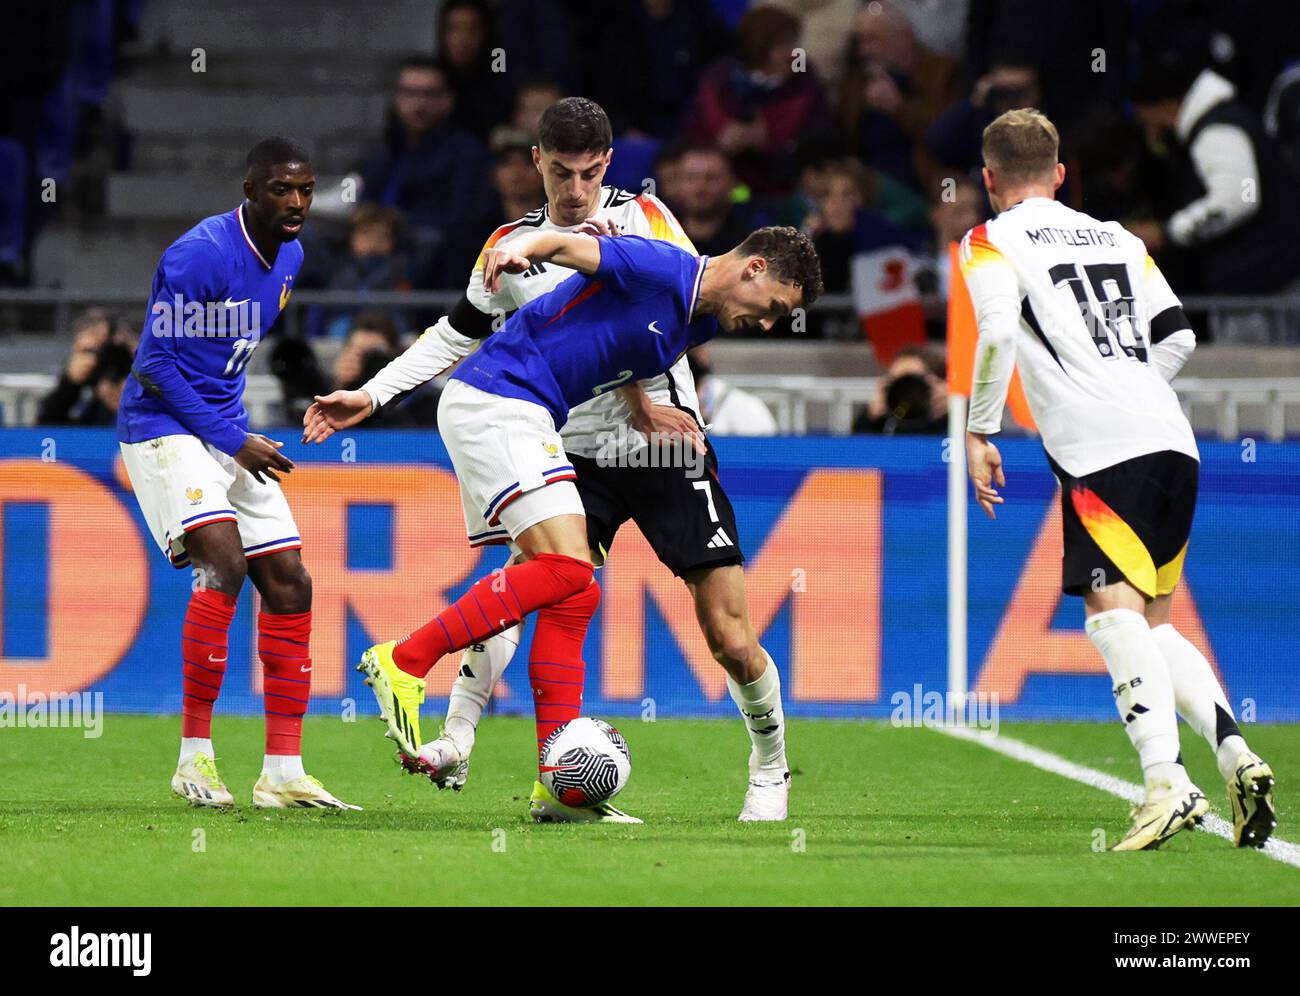 Lyon, France. 23rd Mar, 2024. Soccer: International match, France - Germany, Groupama Stadium. Germany's Kai Havertz (center back) and Maximilian Mittelstädt (right) in action against France's Ousmane Dembelé (left) and Benjamin Pavard. Credit: Christian Charisius/dpa/Alamy Live News Stock Photo